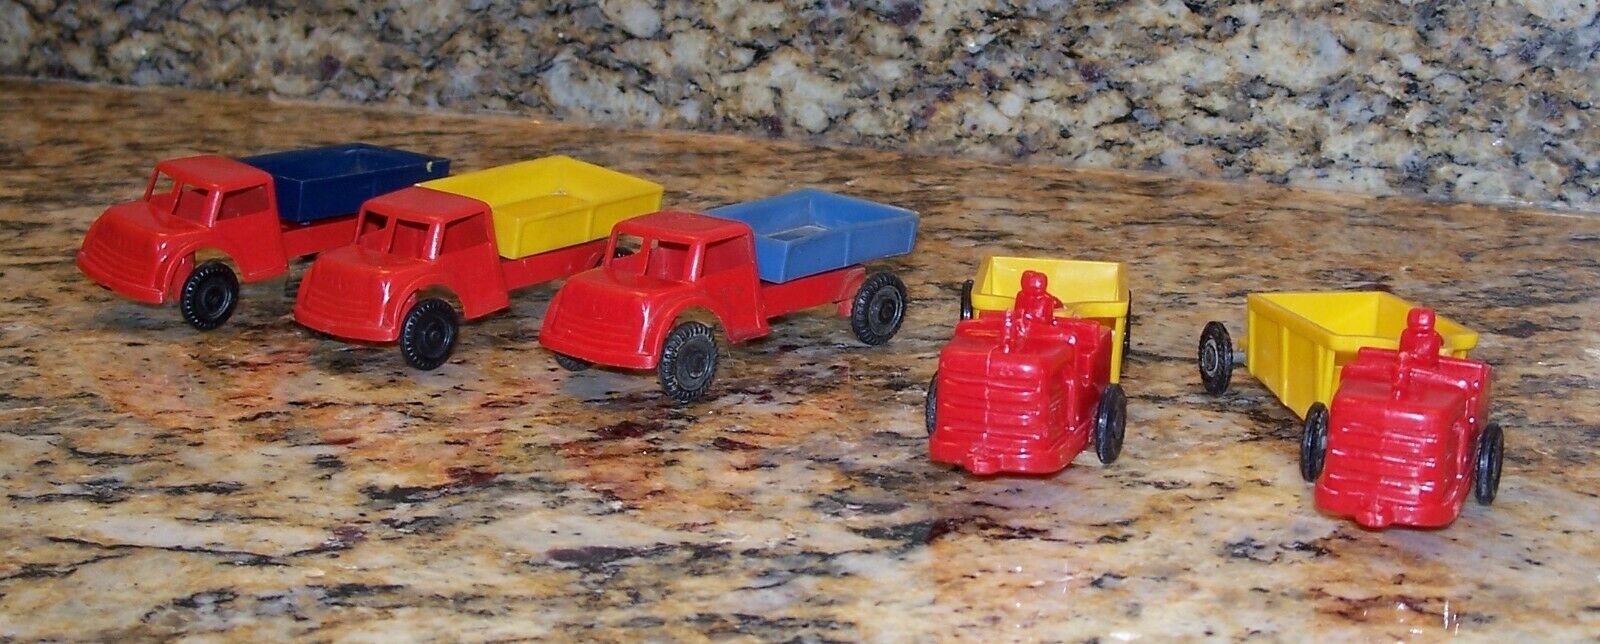 Vintage 1950's Wannatoys Plastic Toy Dump Trucks & Earth Mover Tractor Trailers